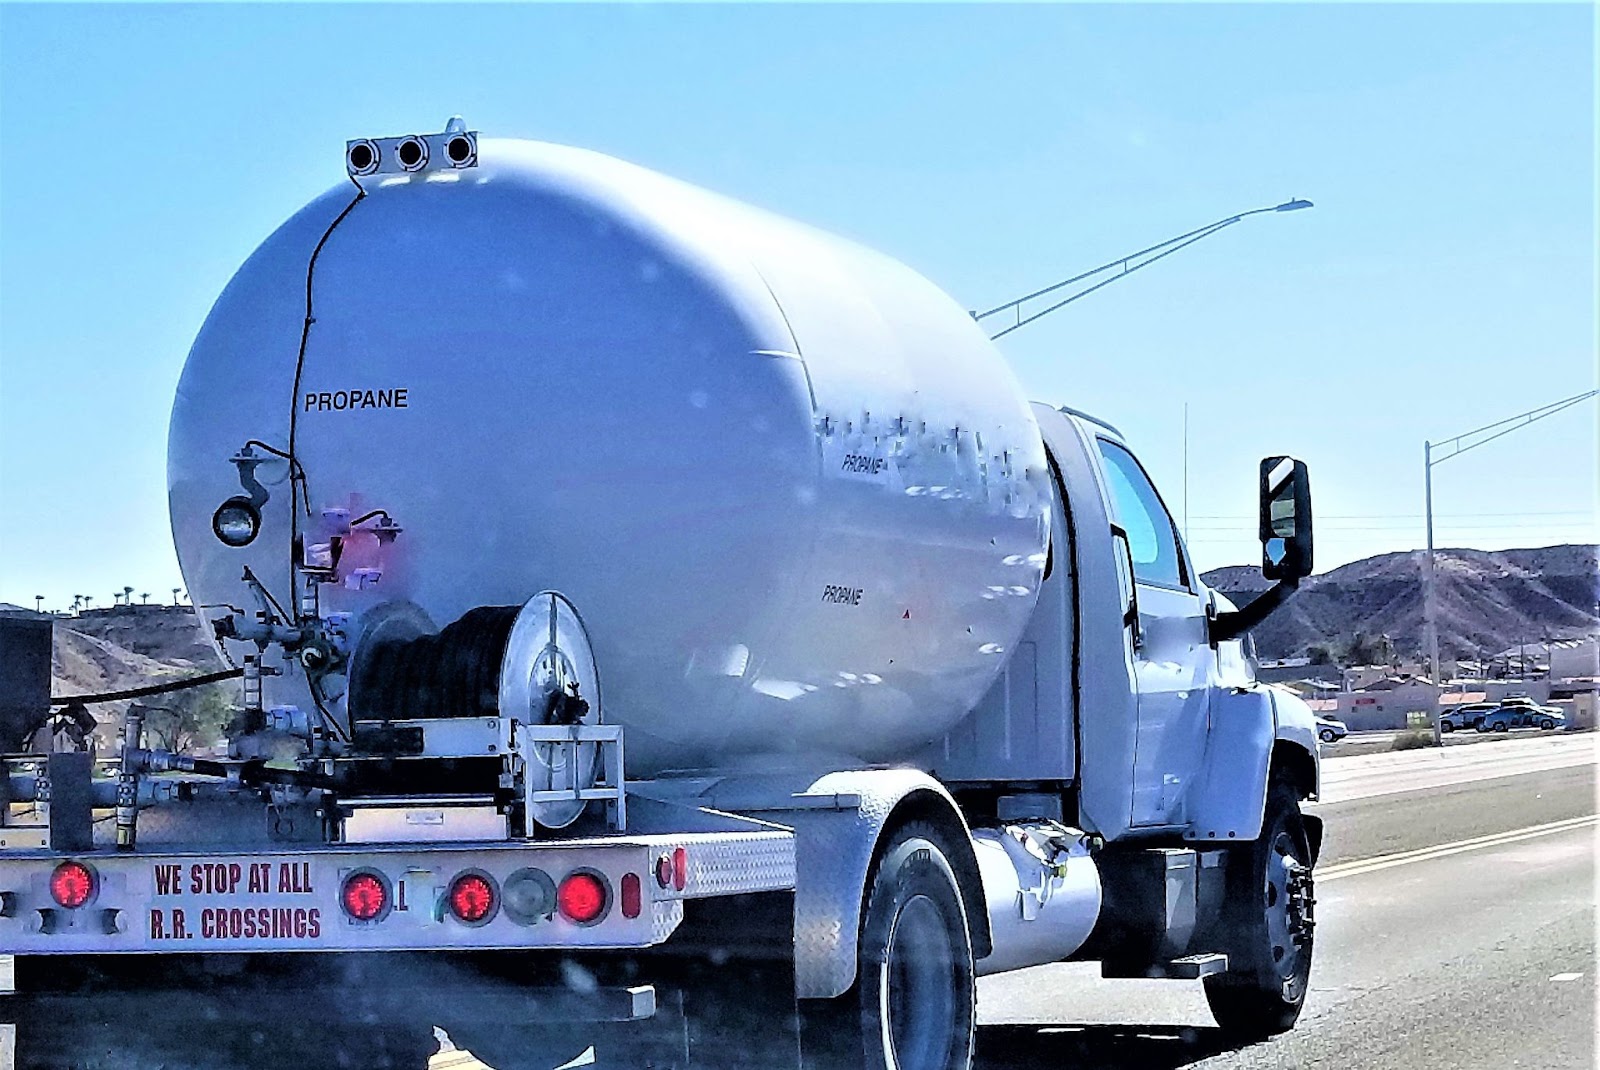 A propane tanker truck on the road, delivering fuel to ensure continuous energy supply for homes.